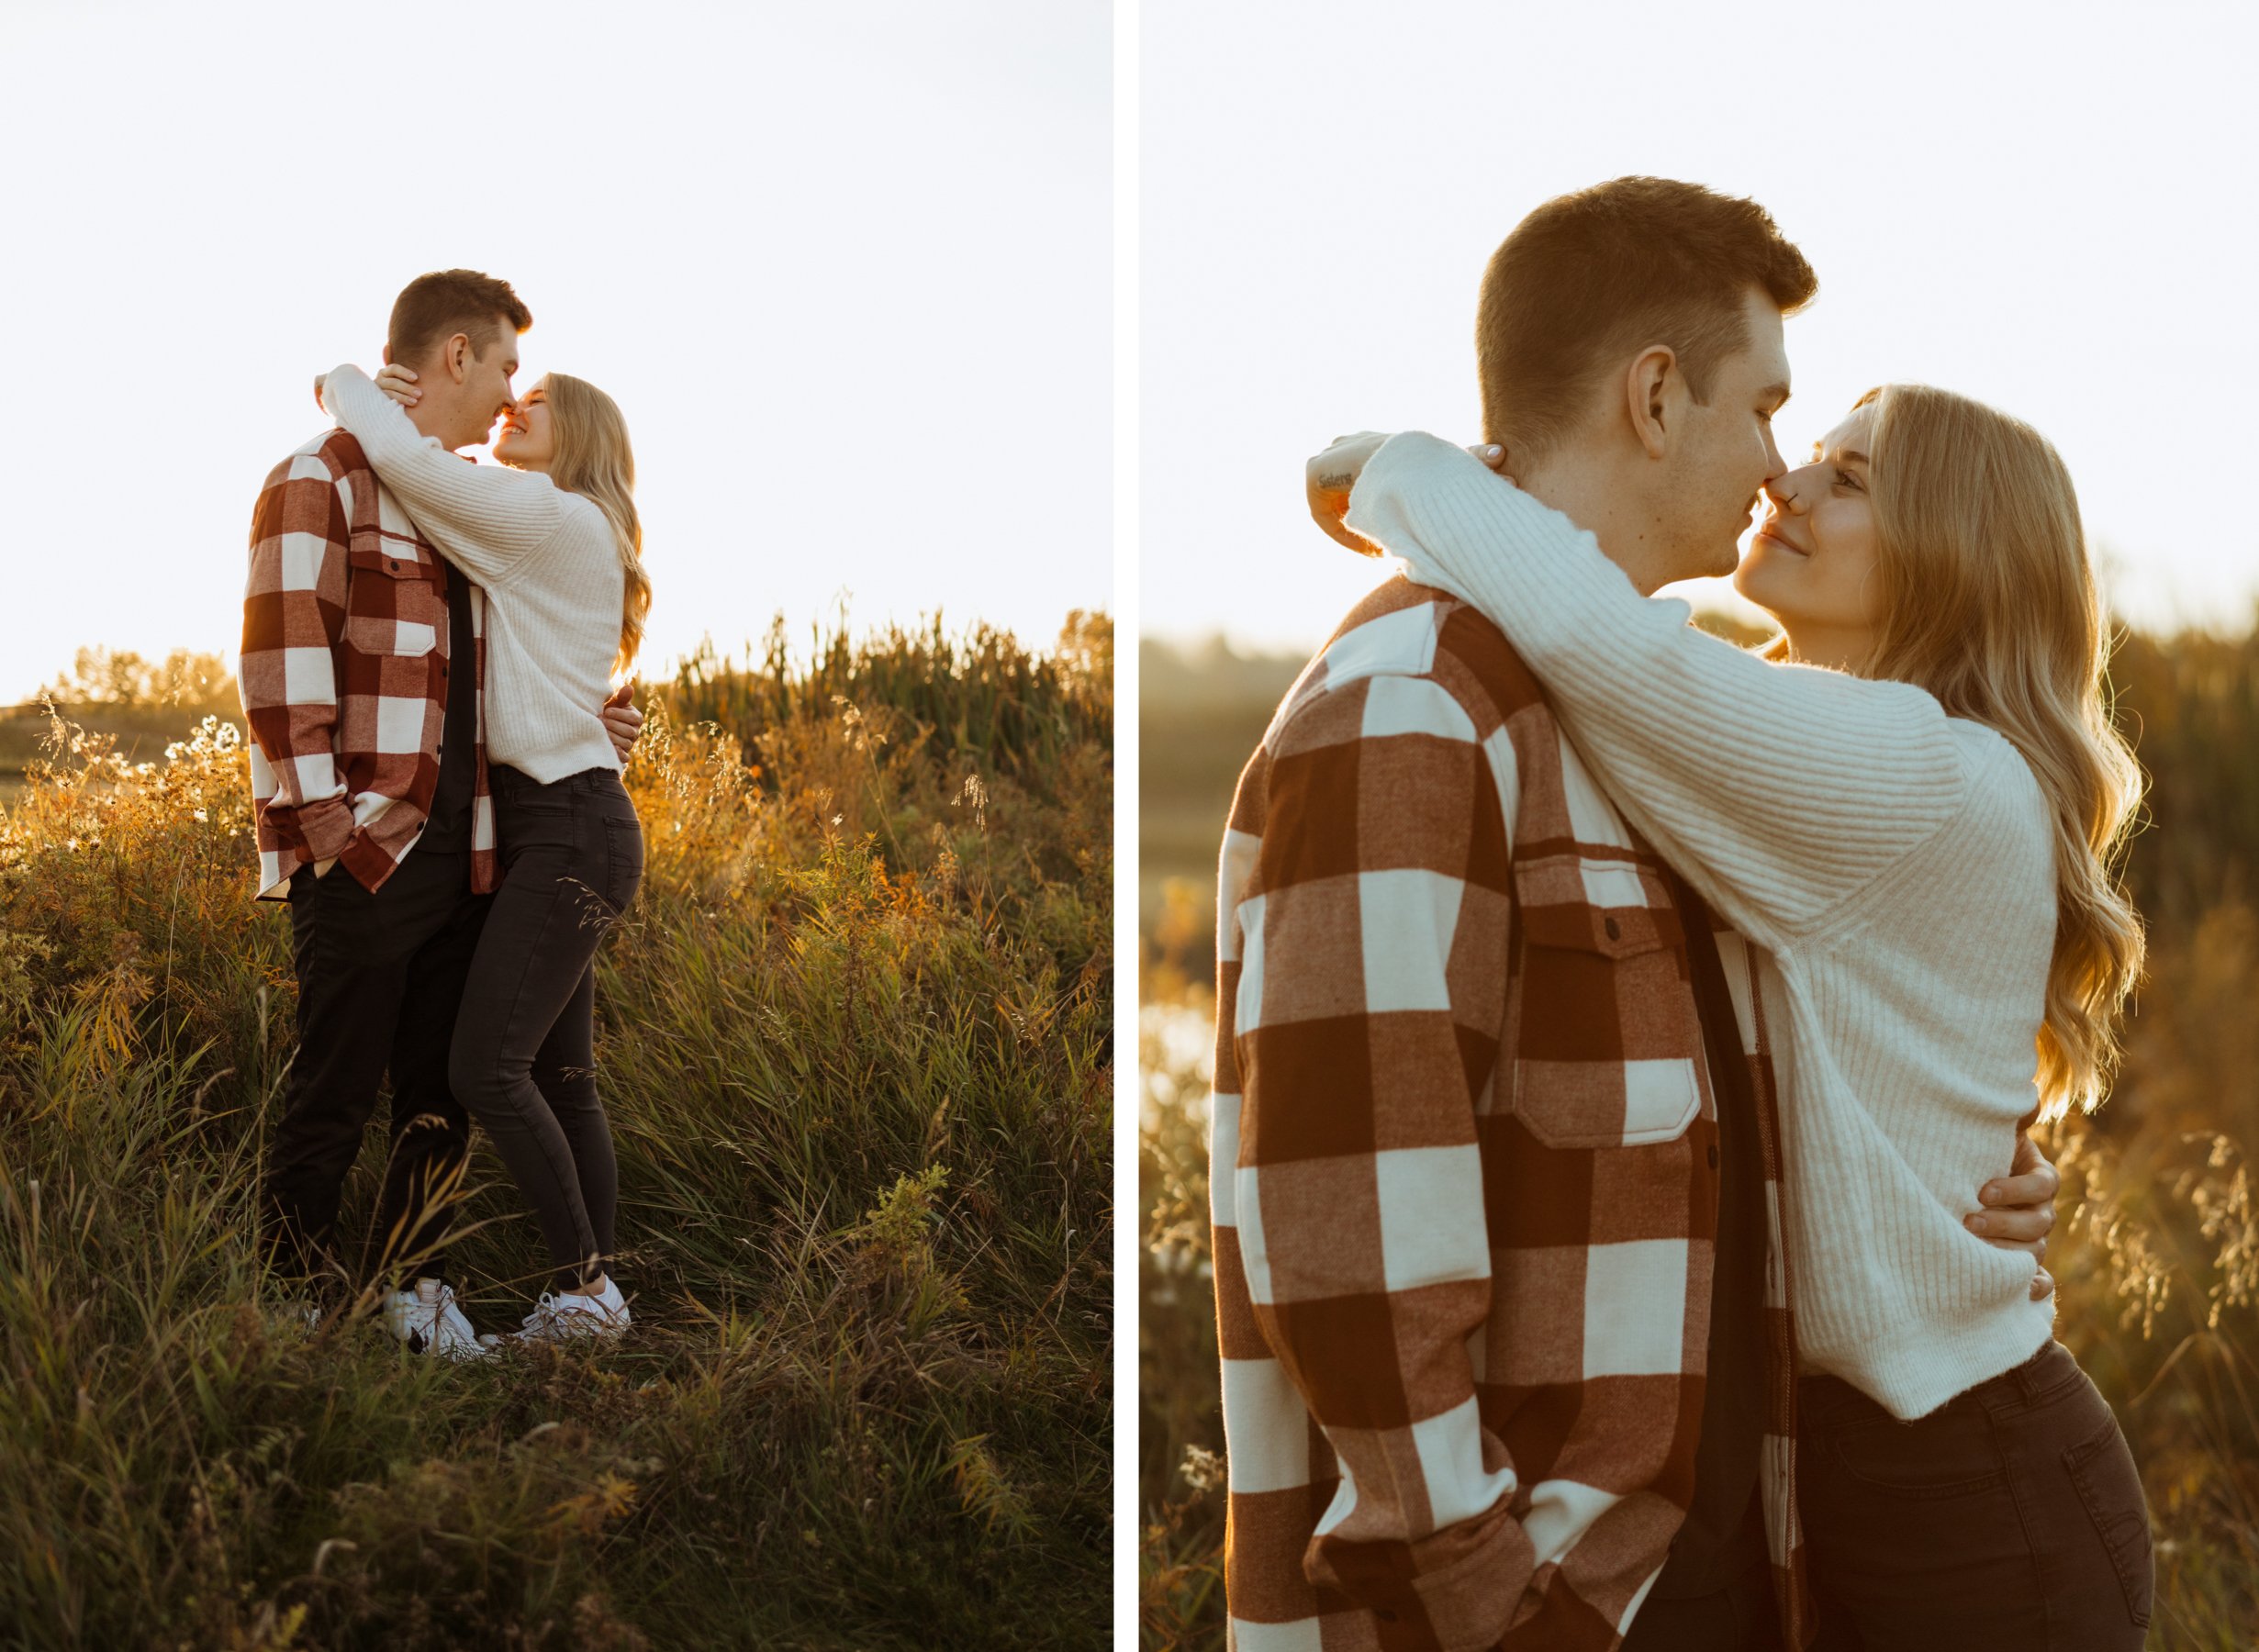 Calgary-wedding-photographer-love-and-be-loved-photography-Matthew-Kyra-Fish-Creek-Park-Fall-Engagement-Session-4.jpg